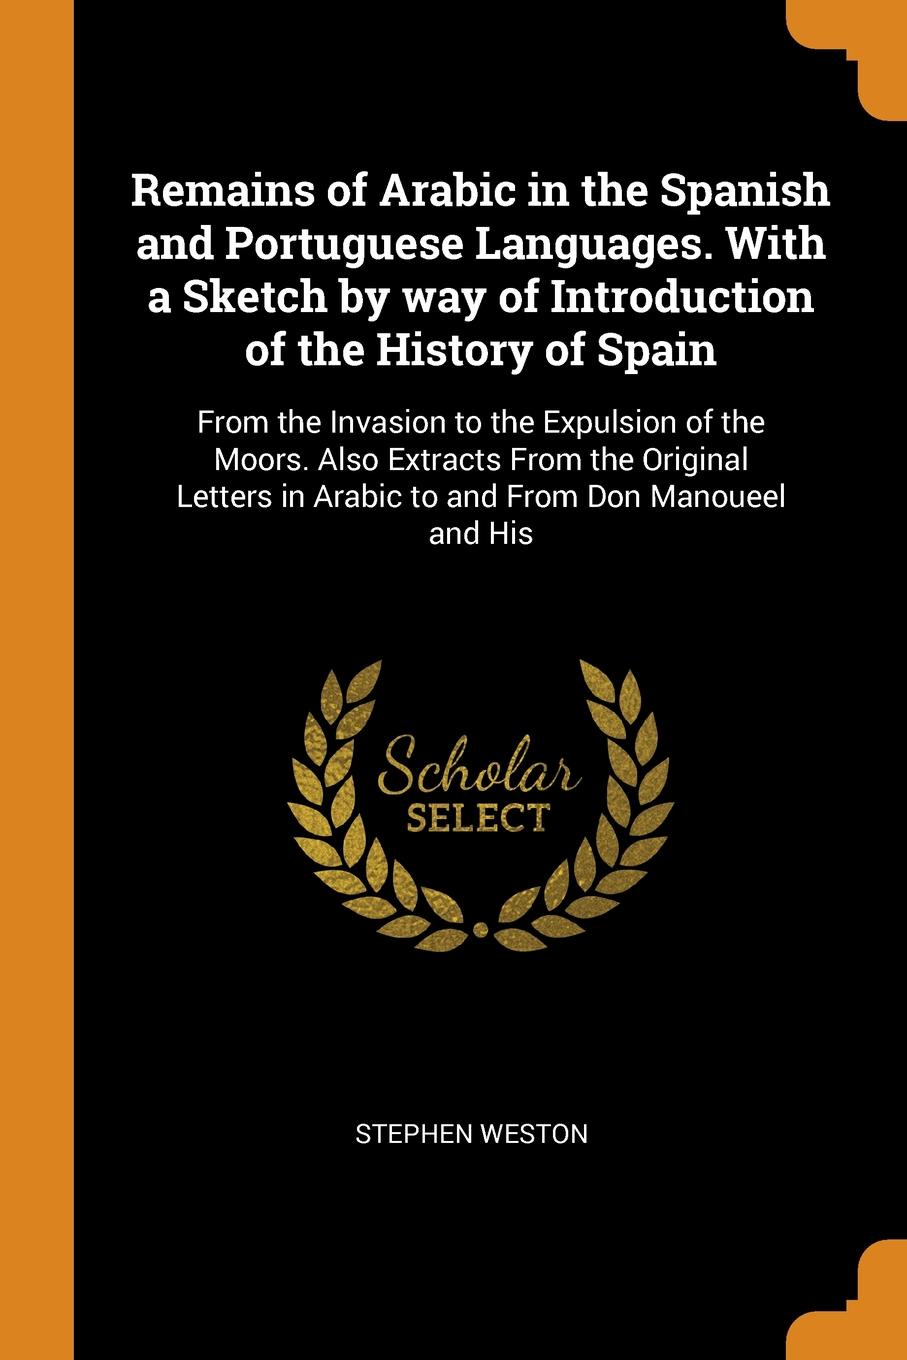 Remains of Arabic in the Spanish and Portuguese Languages. With a Sketch by way of Introduction of the History of Spain. From the Invasion to the Expulsion of the Moors. Also Extracts From the Original Letters in Arabic to and From Don Manoueel an...